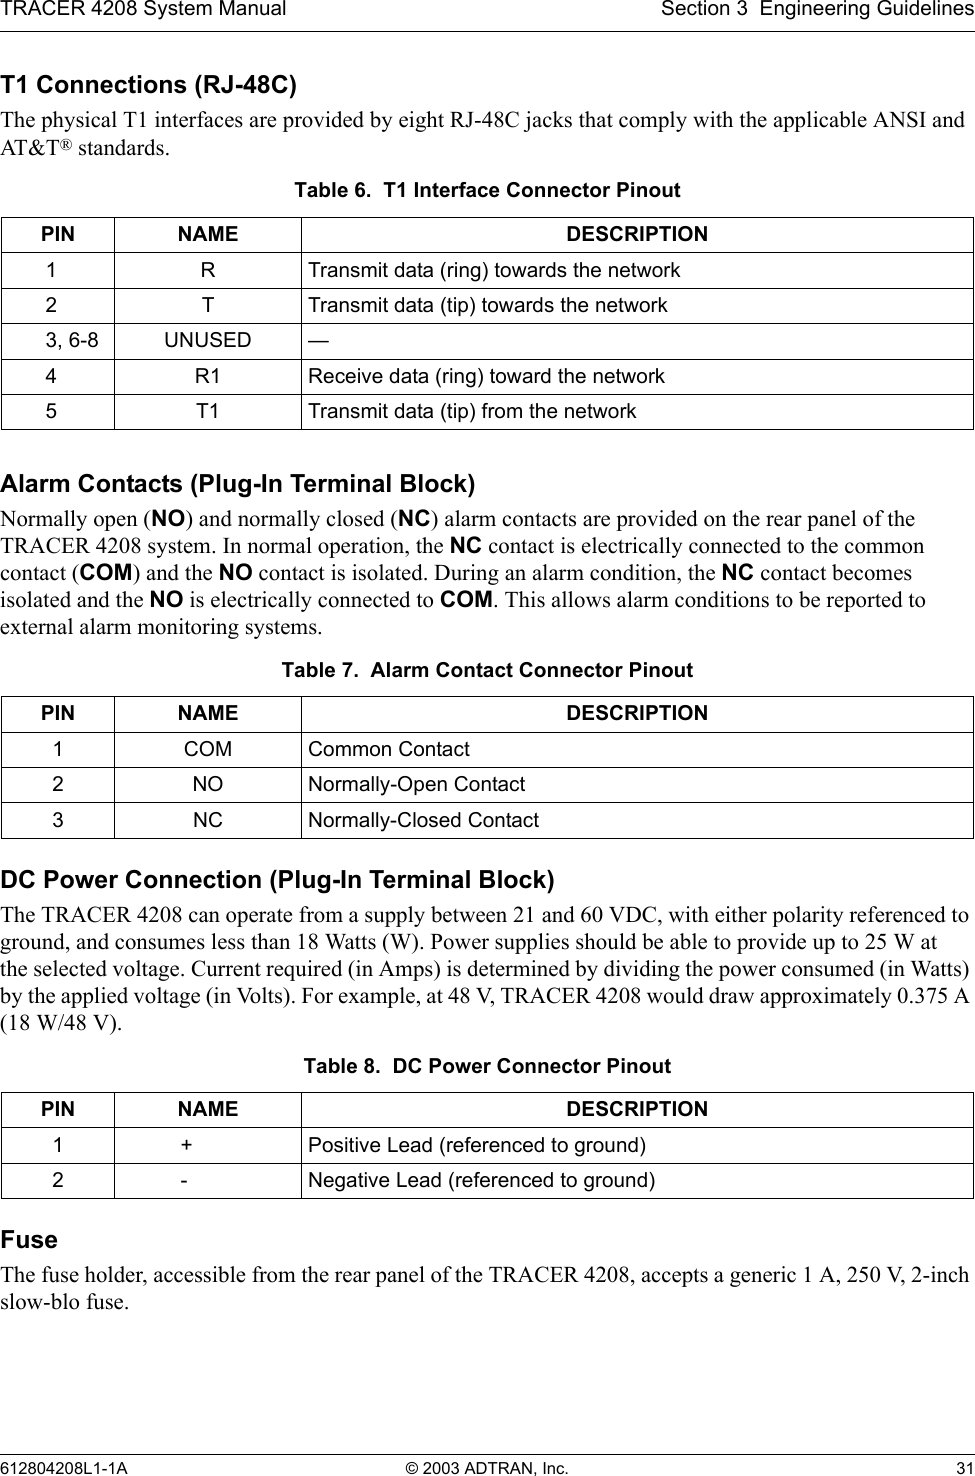 TRACER 4208 System Manual Section 3  Engineering Guidelines612804208L1-1A © 2003 ADTRAN, Inc. 31T1 Connections (RJ-48C)The physical T1 interfaces are provided by eight RJ-48C jacks that comply with the applicable ANSI and AT&amp; T® standards.Alarm Contacts (Plug-In Terminal Block)Normally open (NO) and normally closed (NC) alarm contacts are provided on the rear panel of the TRACER 4208 system. In normal operation, the NC contact is electrically connected to the common contact (COM) and the NO contact is isolated. During an alarm condition, the NC contact becomes isolated and the NO is electrically connected to COM. This allows alarm conditions to be reported to external alarm monitoring systems.DC Power Connection (Plug-In Terminal Block)The TRACER 4208 can operate from a supply between 21 and 60 VDC, with either polarity referenced to ground, and consumes less than 18 Watts (W). Power supplies should be able to provide up to 25 W atthe selected voltage. Current required (in Amps) is determined by dividing the power consumed (in Watts) by the applied voltage (in Volts). For example, at 48 V, TRACER 4208 would draw approximately 0.375 A (18 W/48 V).FuseThe fuse holder, accessible from the rear panel of the TRACER 4208, accepts a generic 1 A, 250 V, 2-inch slow-blo fuse.Table 6.  T1 Interface Connector PinoutPIN NAME DESCRIPTION1RTransmit data (ring) towards the network2 T Transmit data (tip) towards the network3, 6-8 UNUSED —4R1 Receive data (ring) toward the network5T1 Transmit data (tip) from the networkTable 7.  Alarm Contact Connector PinoutPIN NAME DESCRIPTION1 COM Common Contact2NO Normally-Open Contact3NC Normally-Closed ContactTable 8.  DC Power Connector PinoutPIN NAME DESCRIPTION1 + Positive Lead (referenced to ground)2 - Negative Lead (referenced to ground)